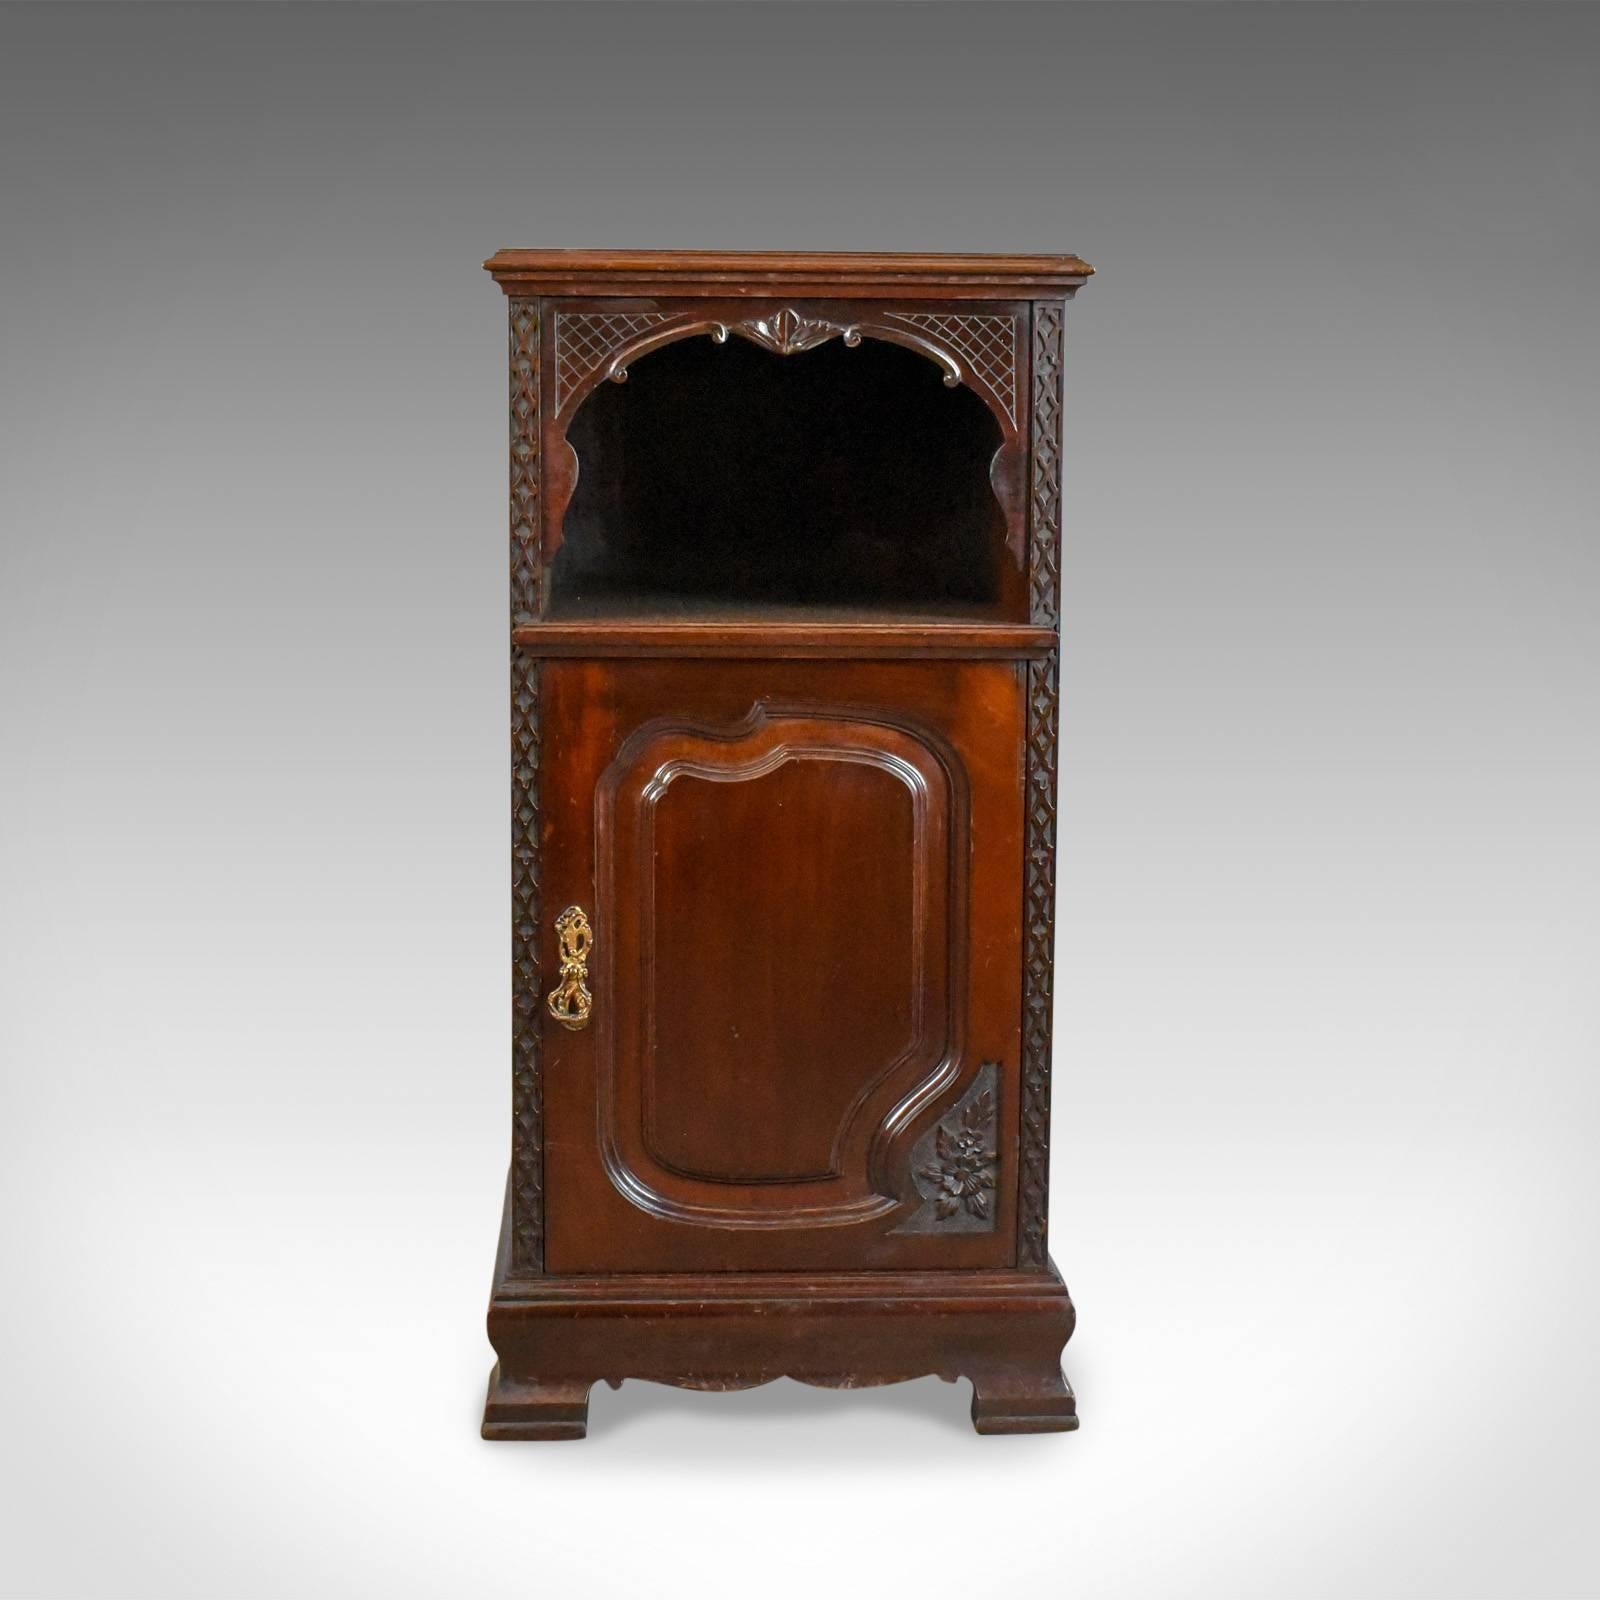 This is an antique bedside cabinet in carved mahogany. A nightstand. English dating to the Edwardian period, circa 1910.

Craftsmanship in a quality dark mahogany with a wax polished finish
Good consistent colour throughout with a desirable aged